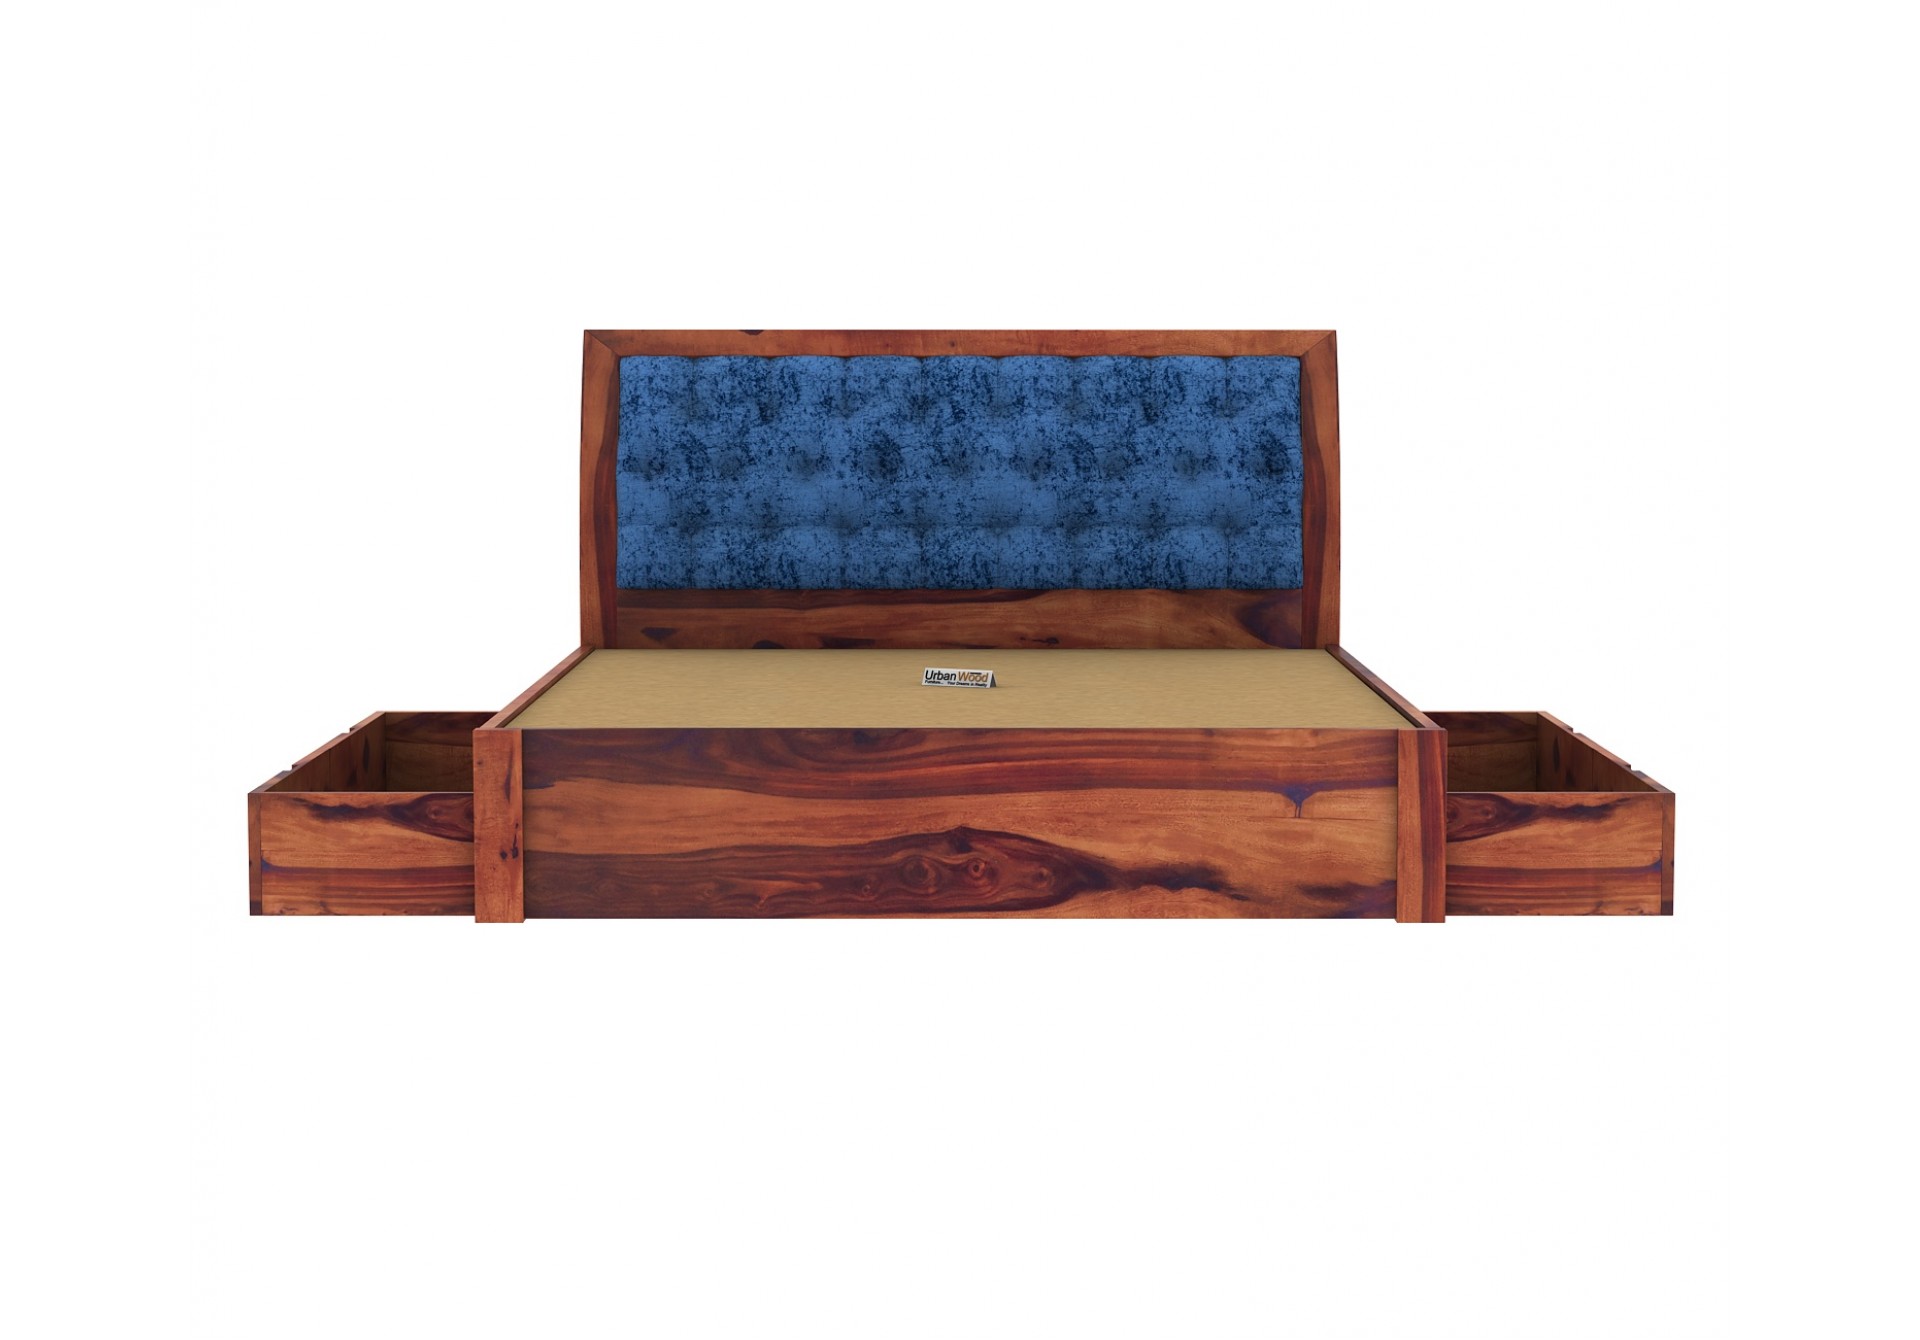 Ross  Wooden Bed With Drawer Storage (Queen Size, Teak Finish)